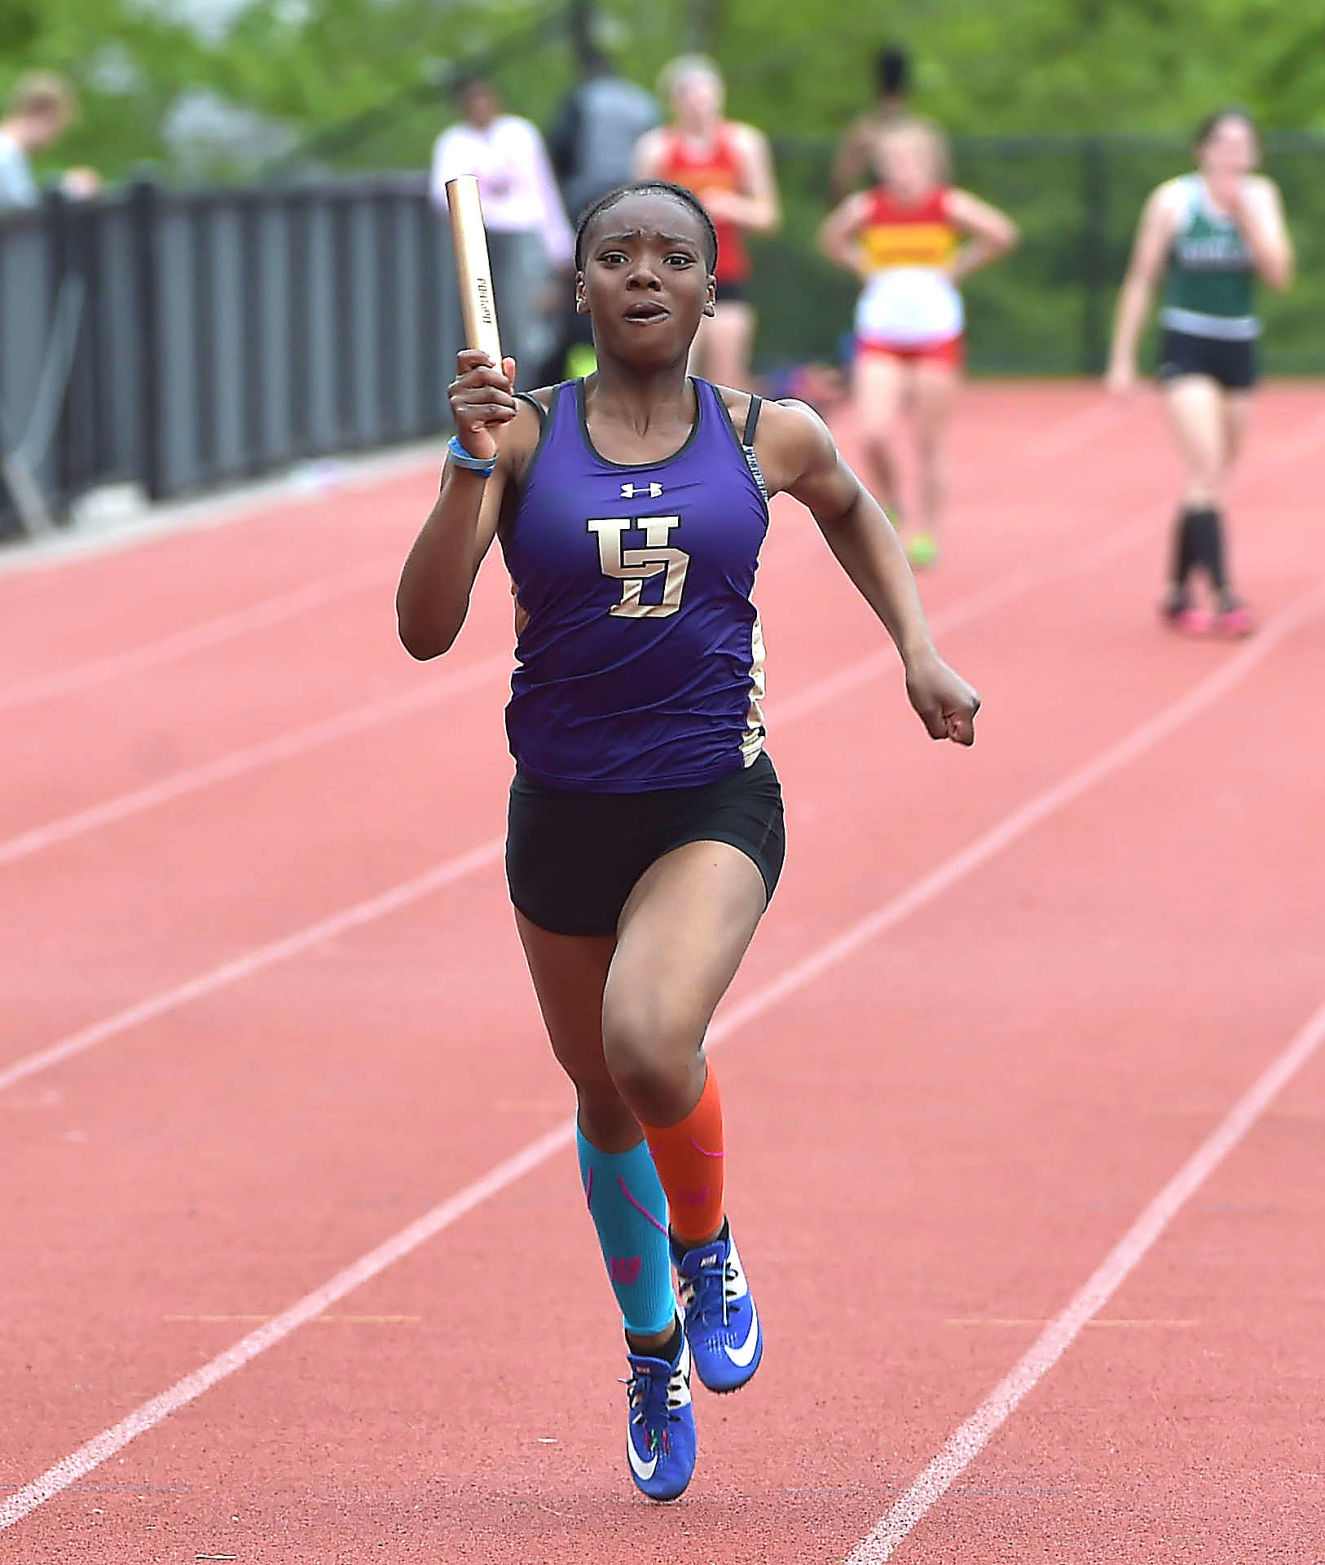 Smart’s impact clearly seen on Upper Darby girls track team PA Prep Live